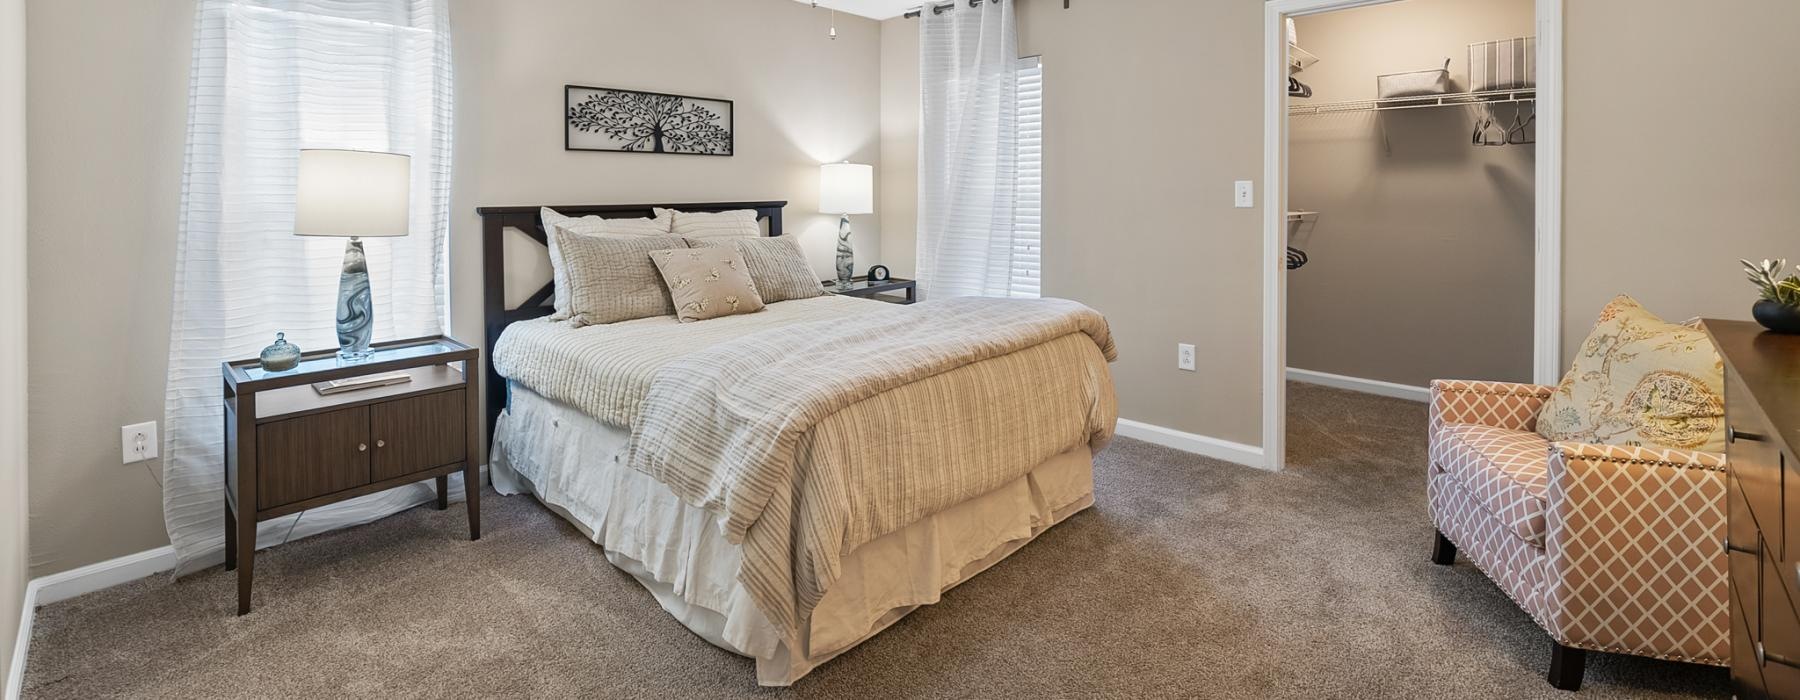 large, carpeted bedroom